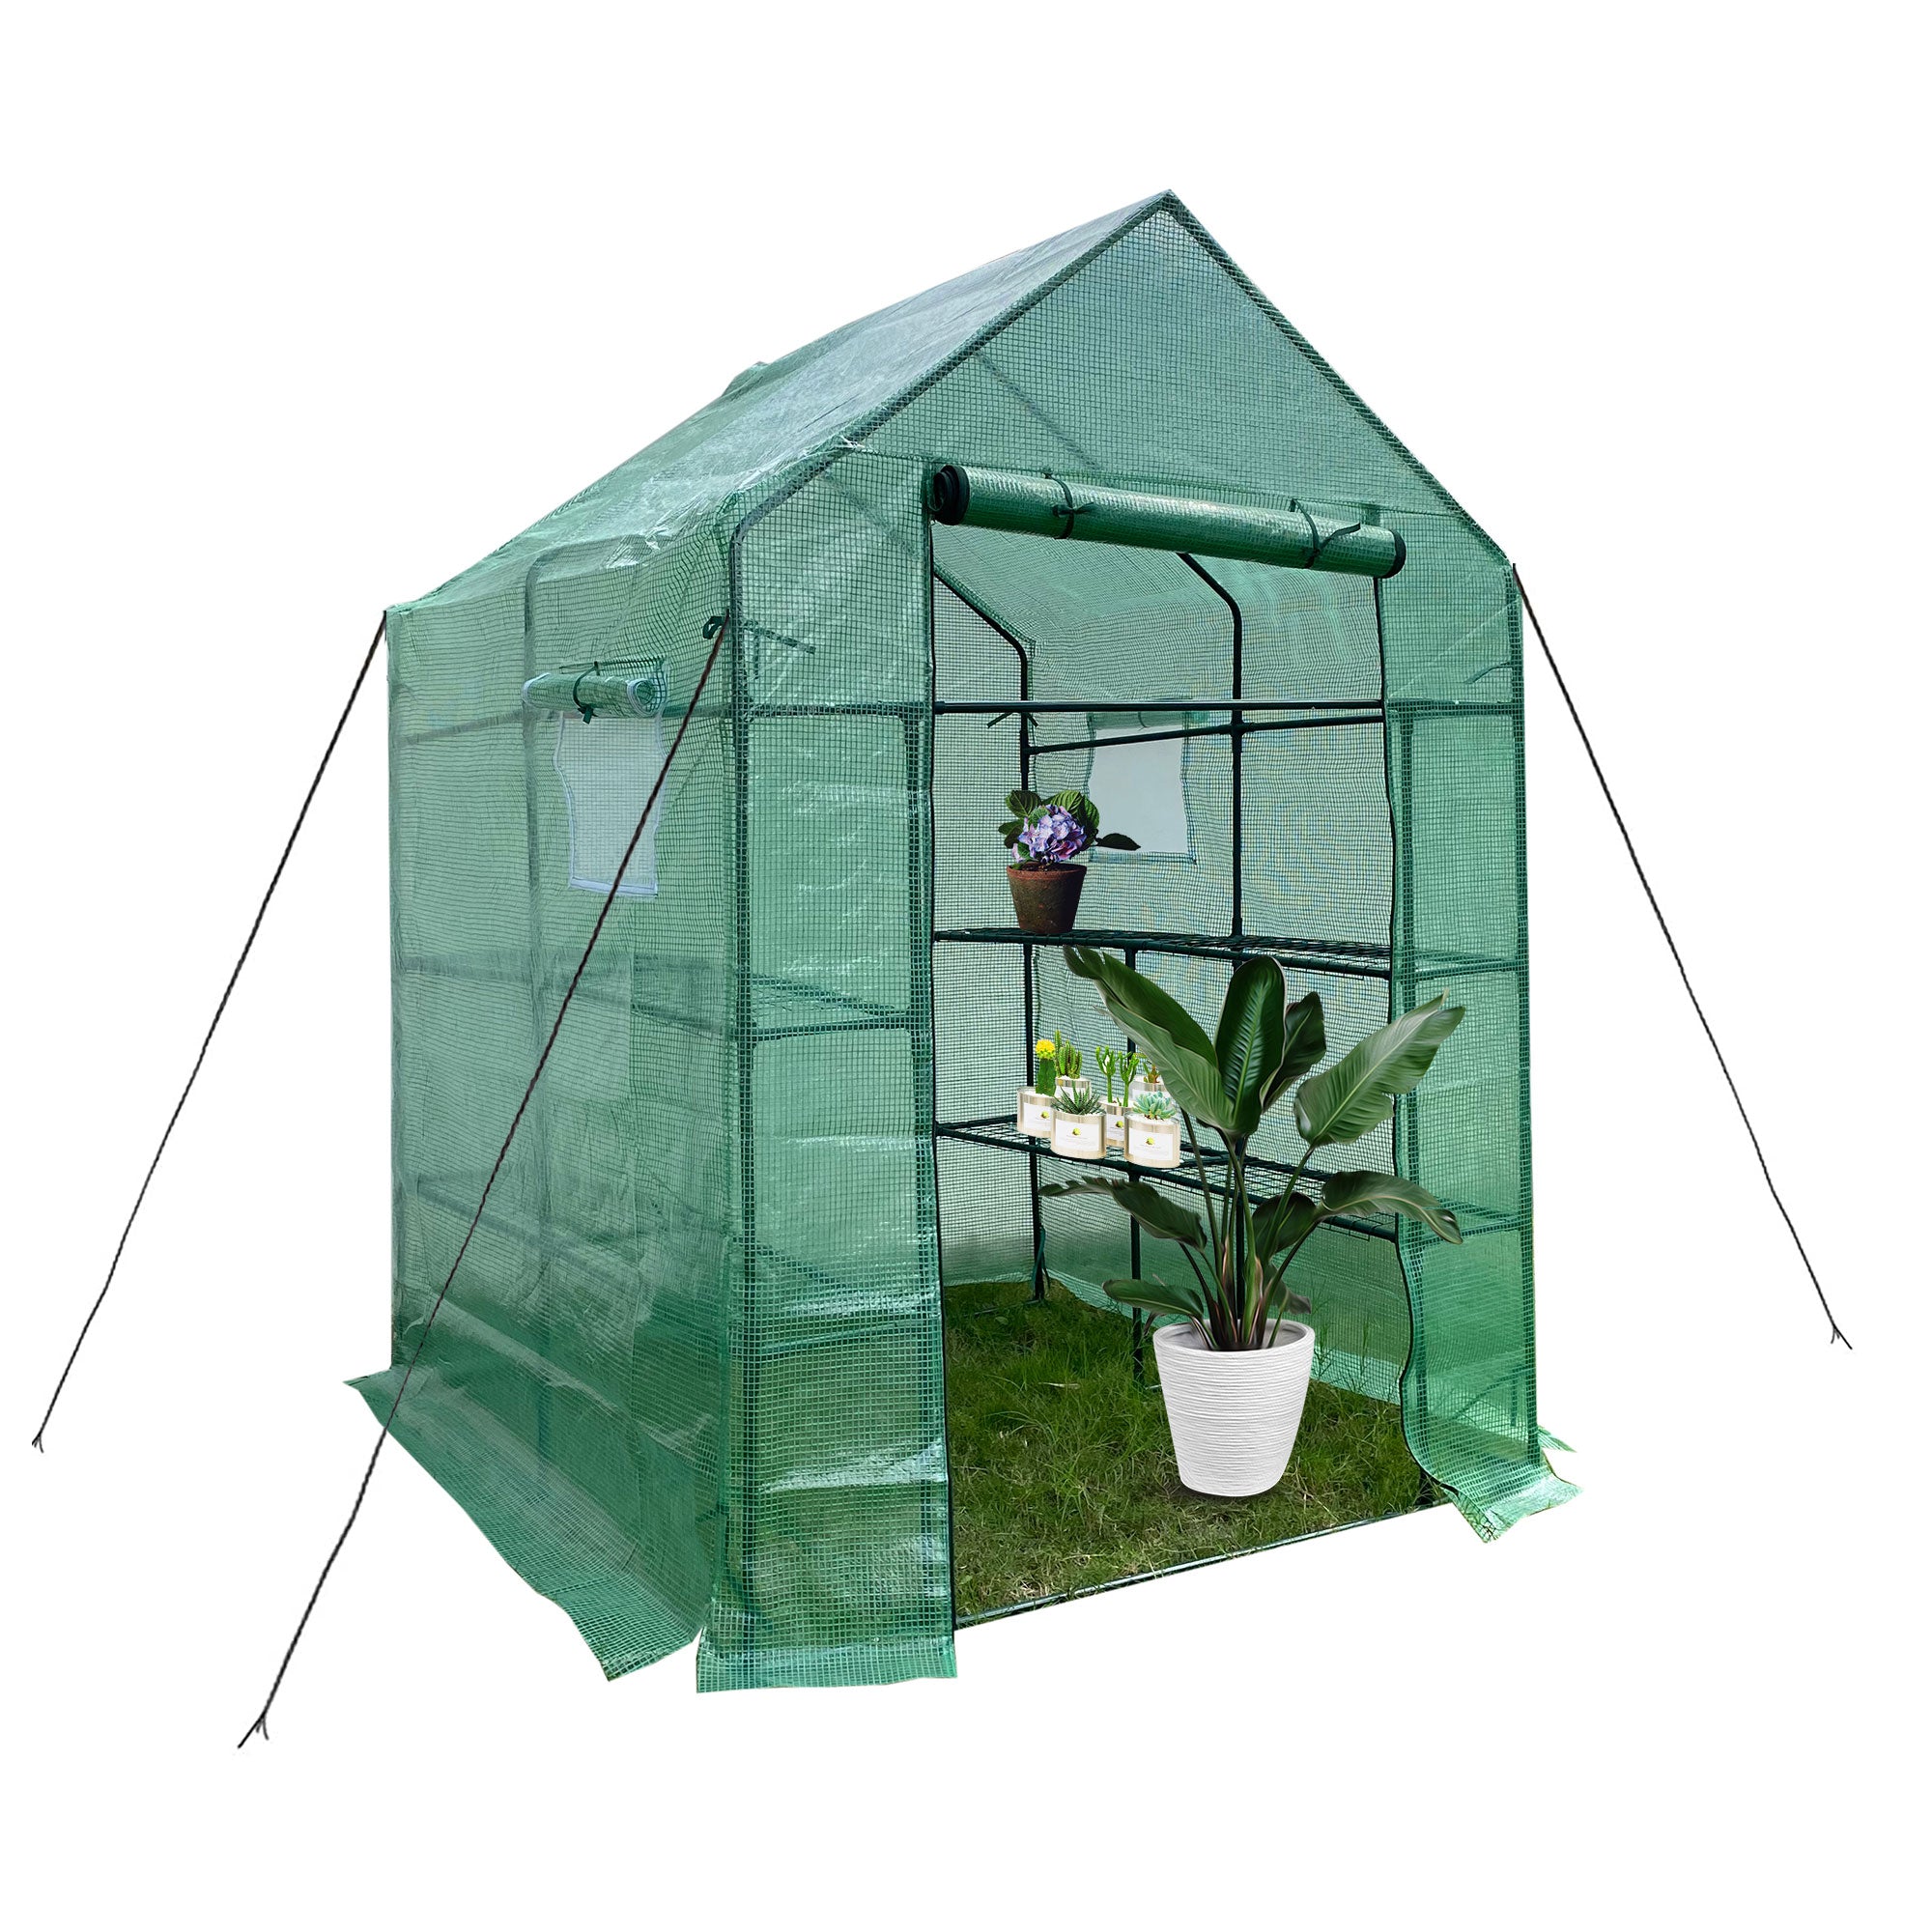 Mini Walk-in Greenhouse Indoor Outdoor -2 Tier Shelves- Portable Plant  Gardening Greenhouse, Grow Plant Herbs Flowers Hot House